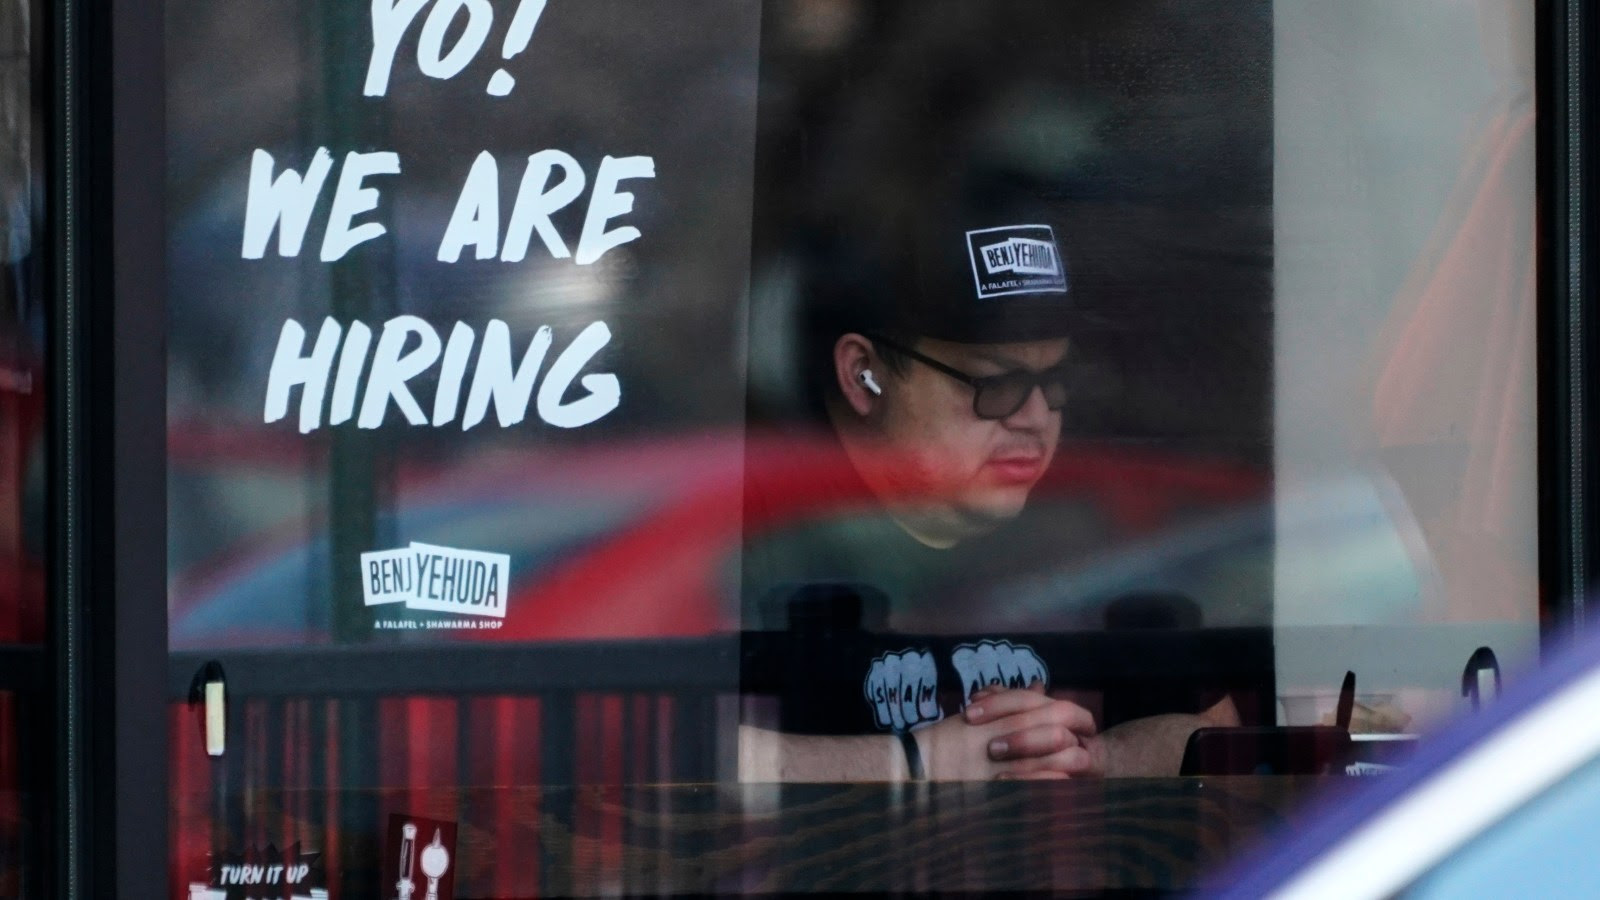 US added 390,000 jobs in May as hiring remained robust